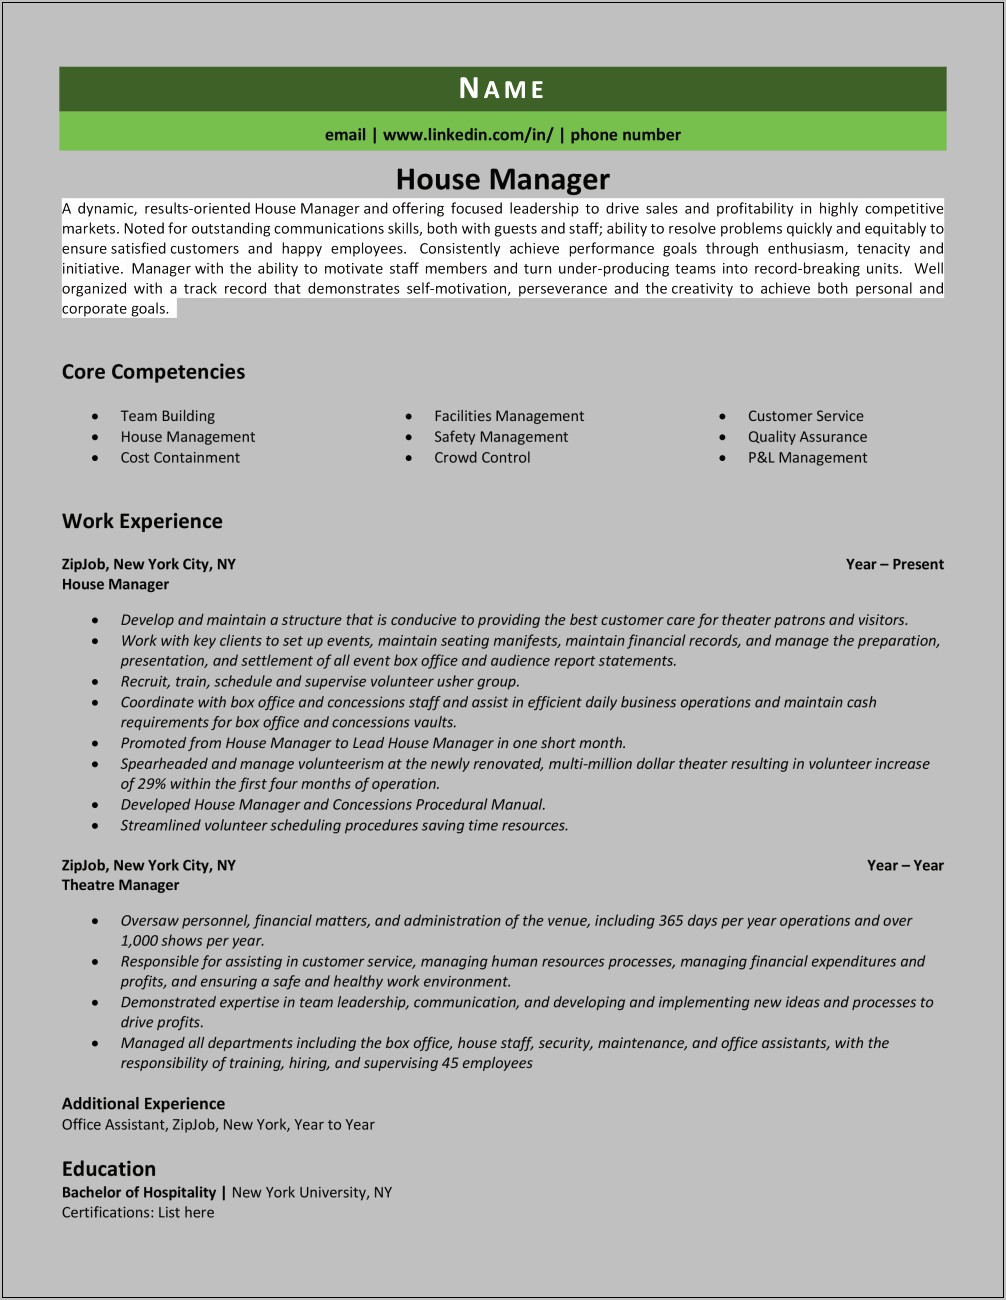 Resume For A House Manager In Recovery